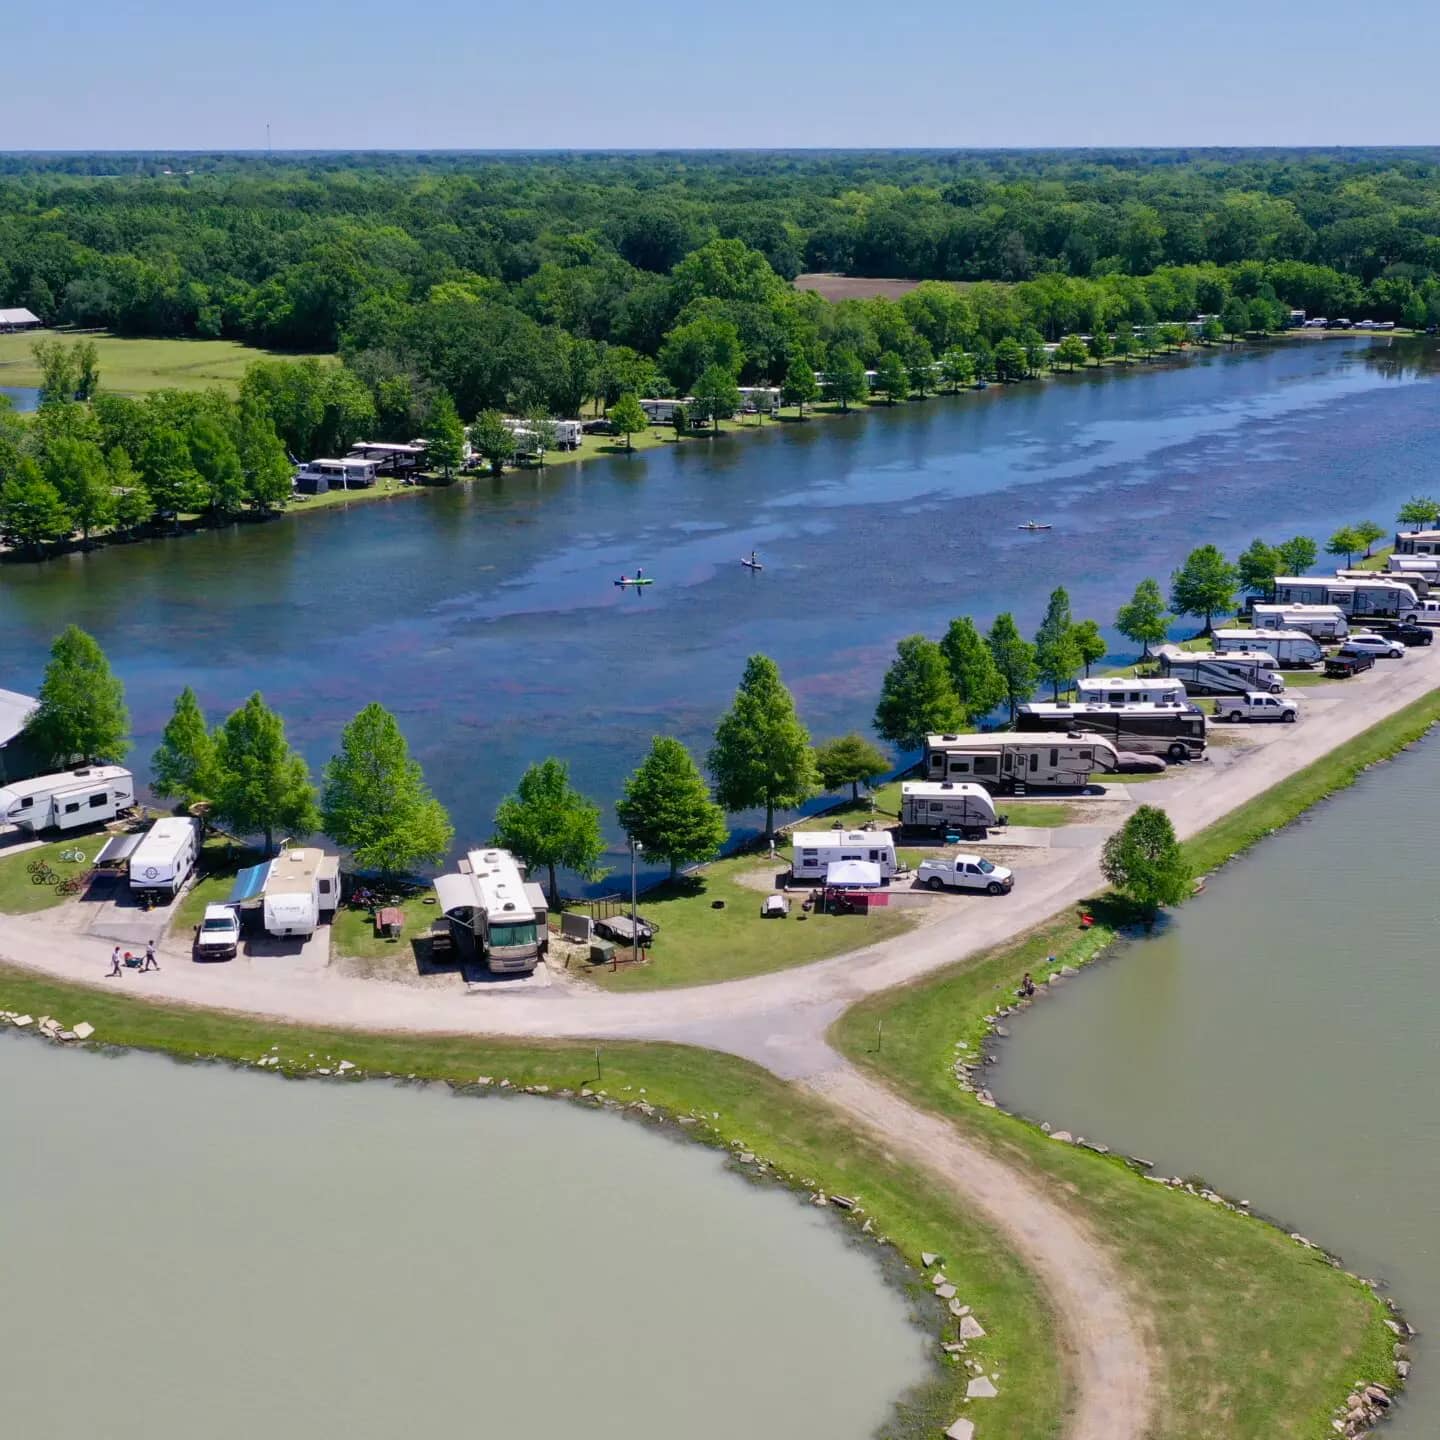 Poche's RV Park and Fish-N-Camp